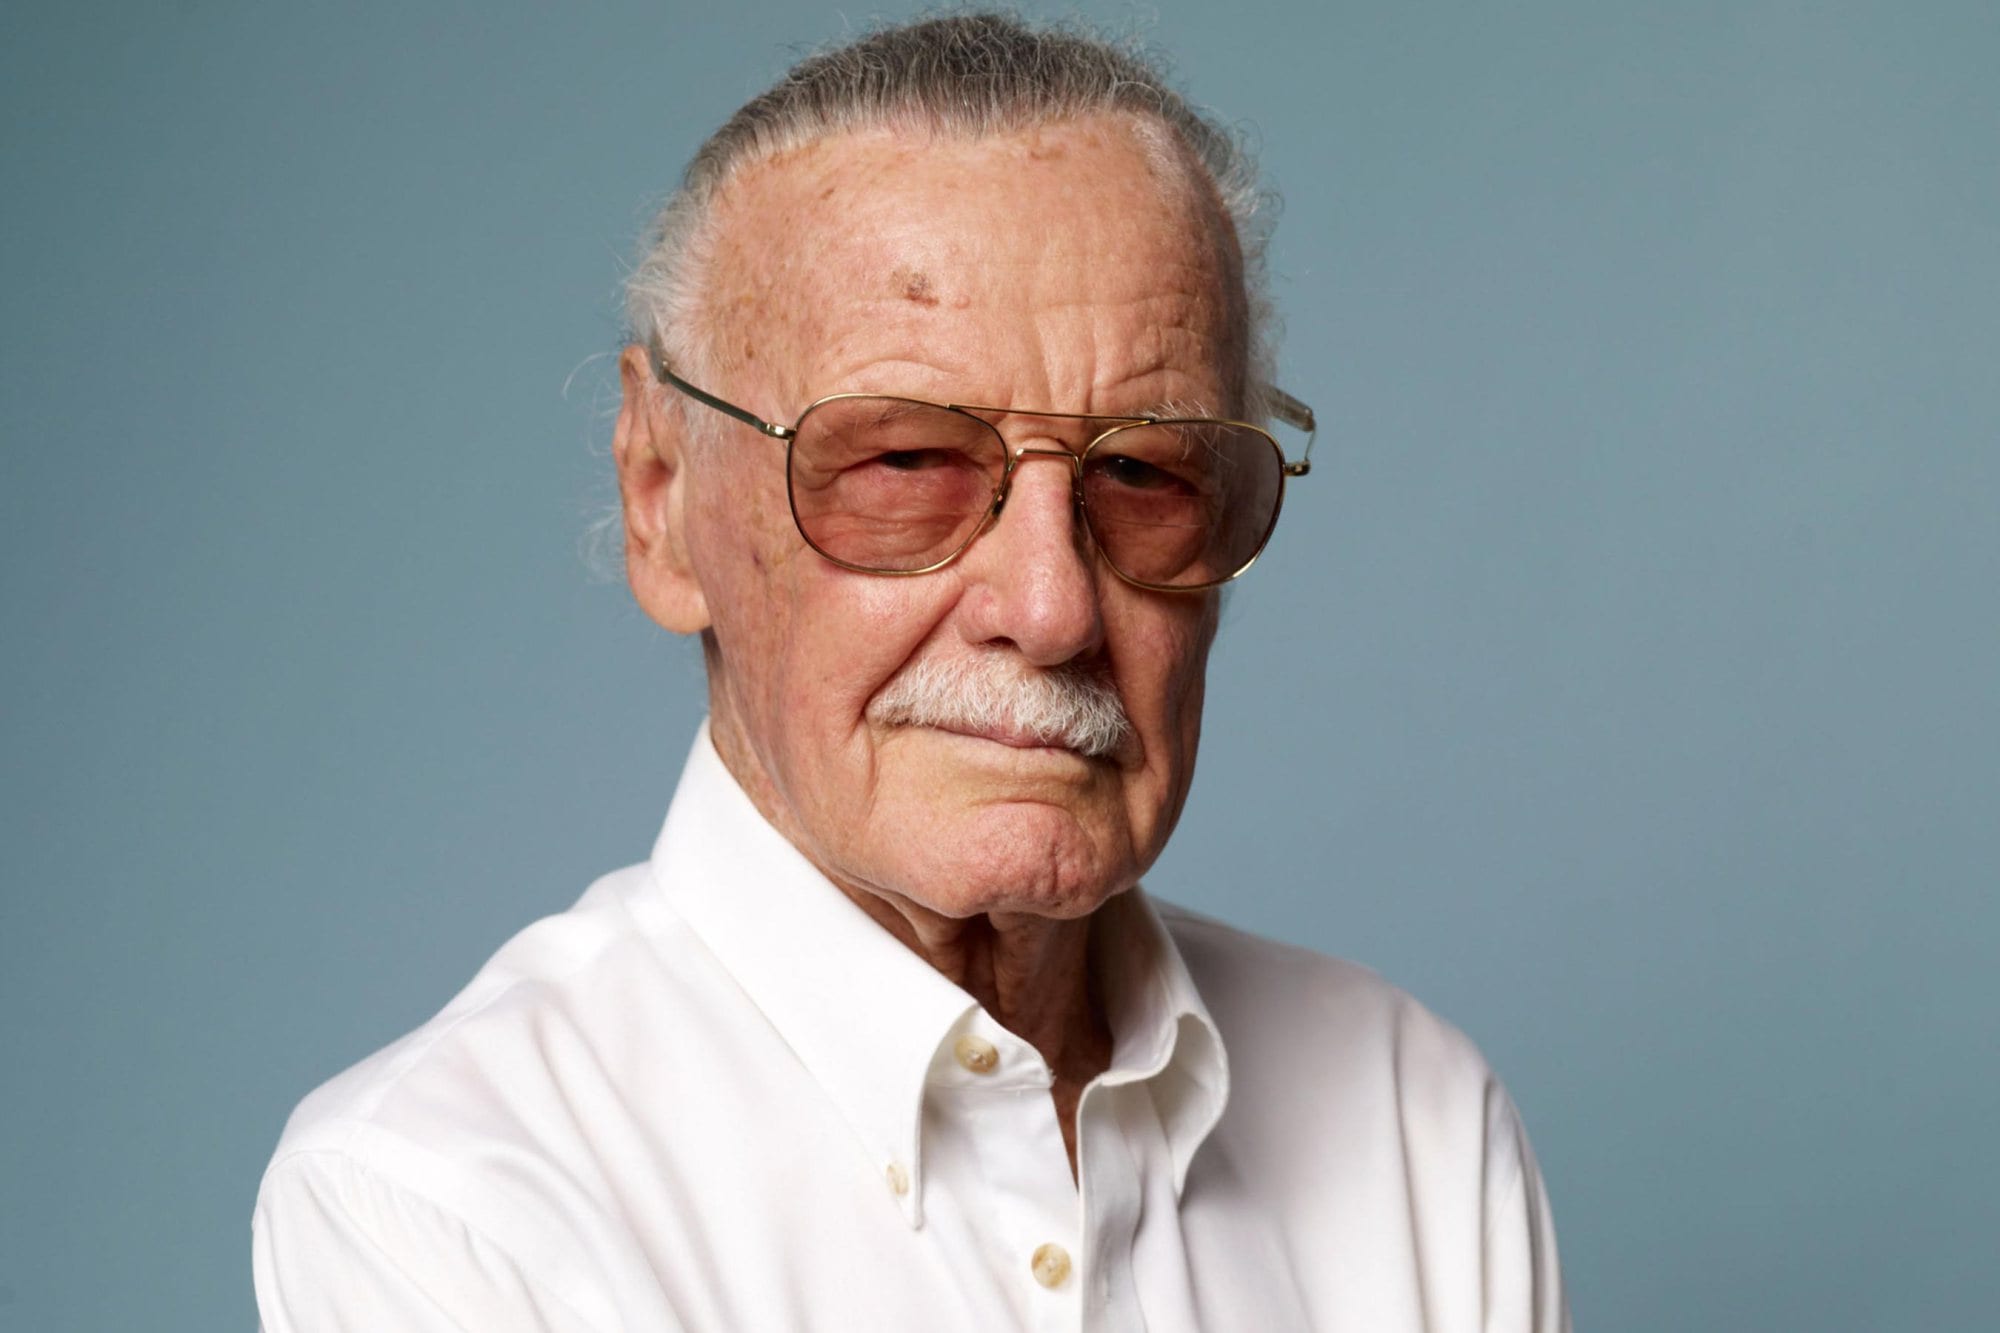 Gather your very own fantastic four and raise your Infinity Gauntlet to the Marvel mastermind, Stan Lee, who has passed away aged 95.